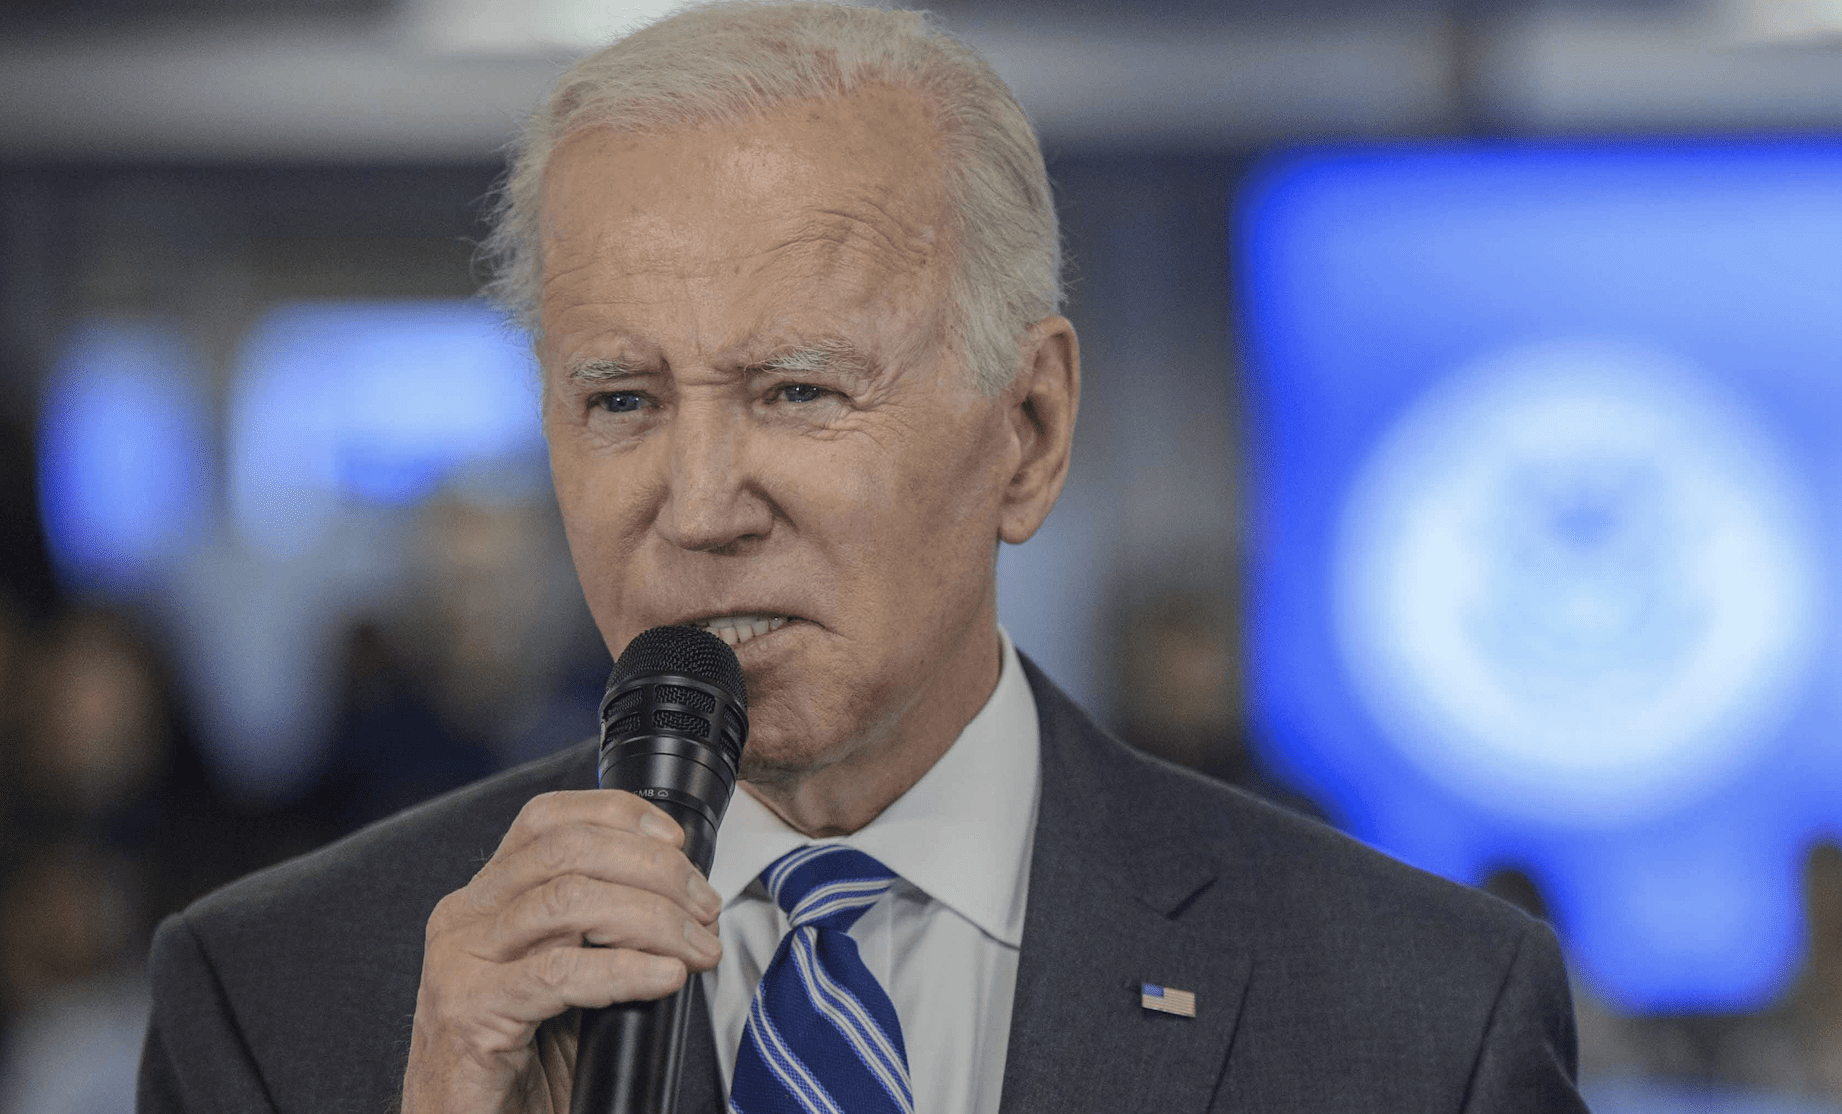 biden-appears-to-get-off-course-during-press-conference,-officials-try-to-grab-his-attention